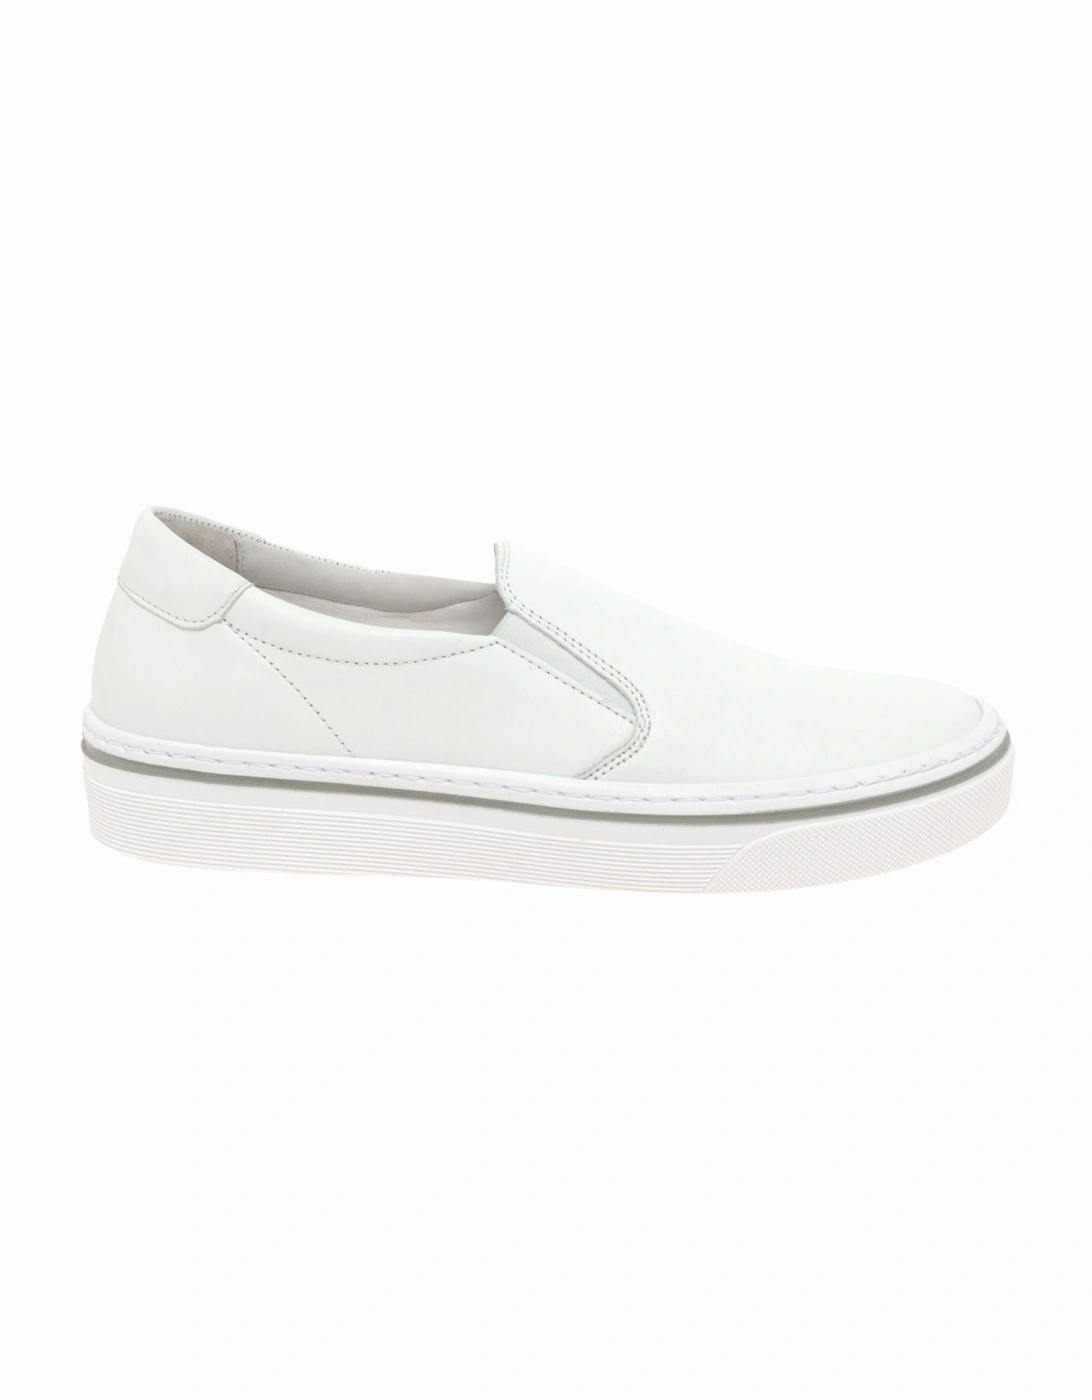 Compass Women's Trainers